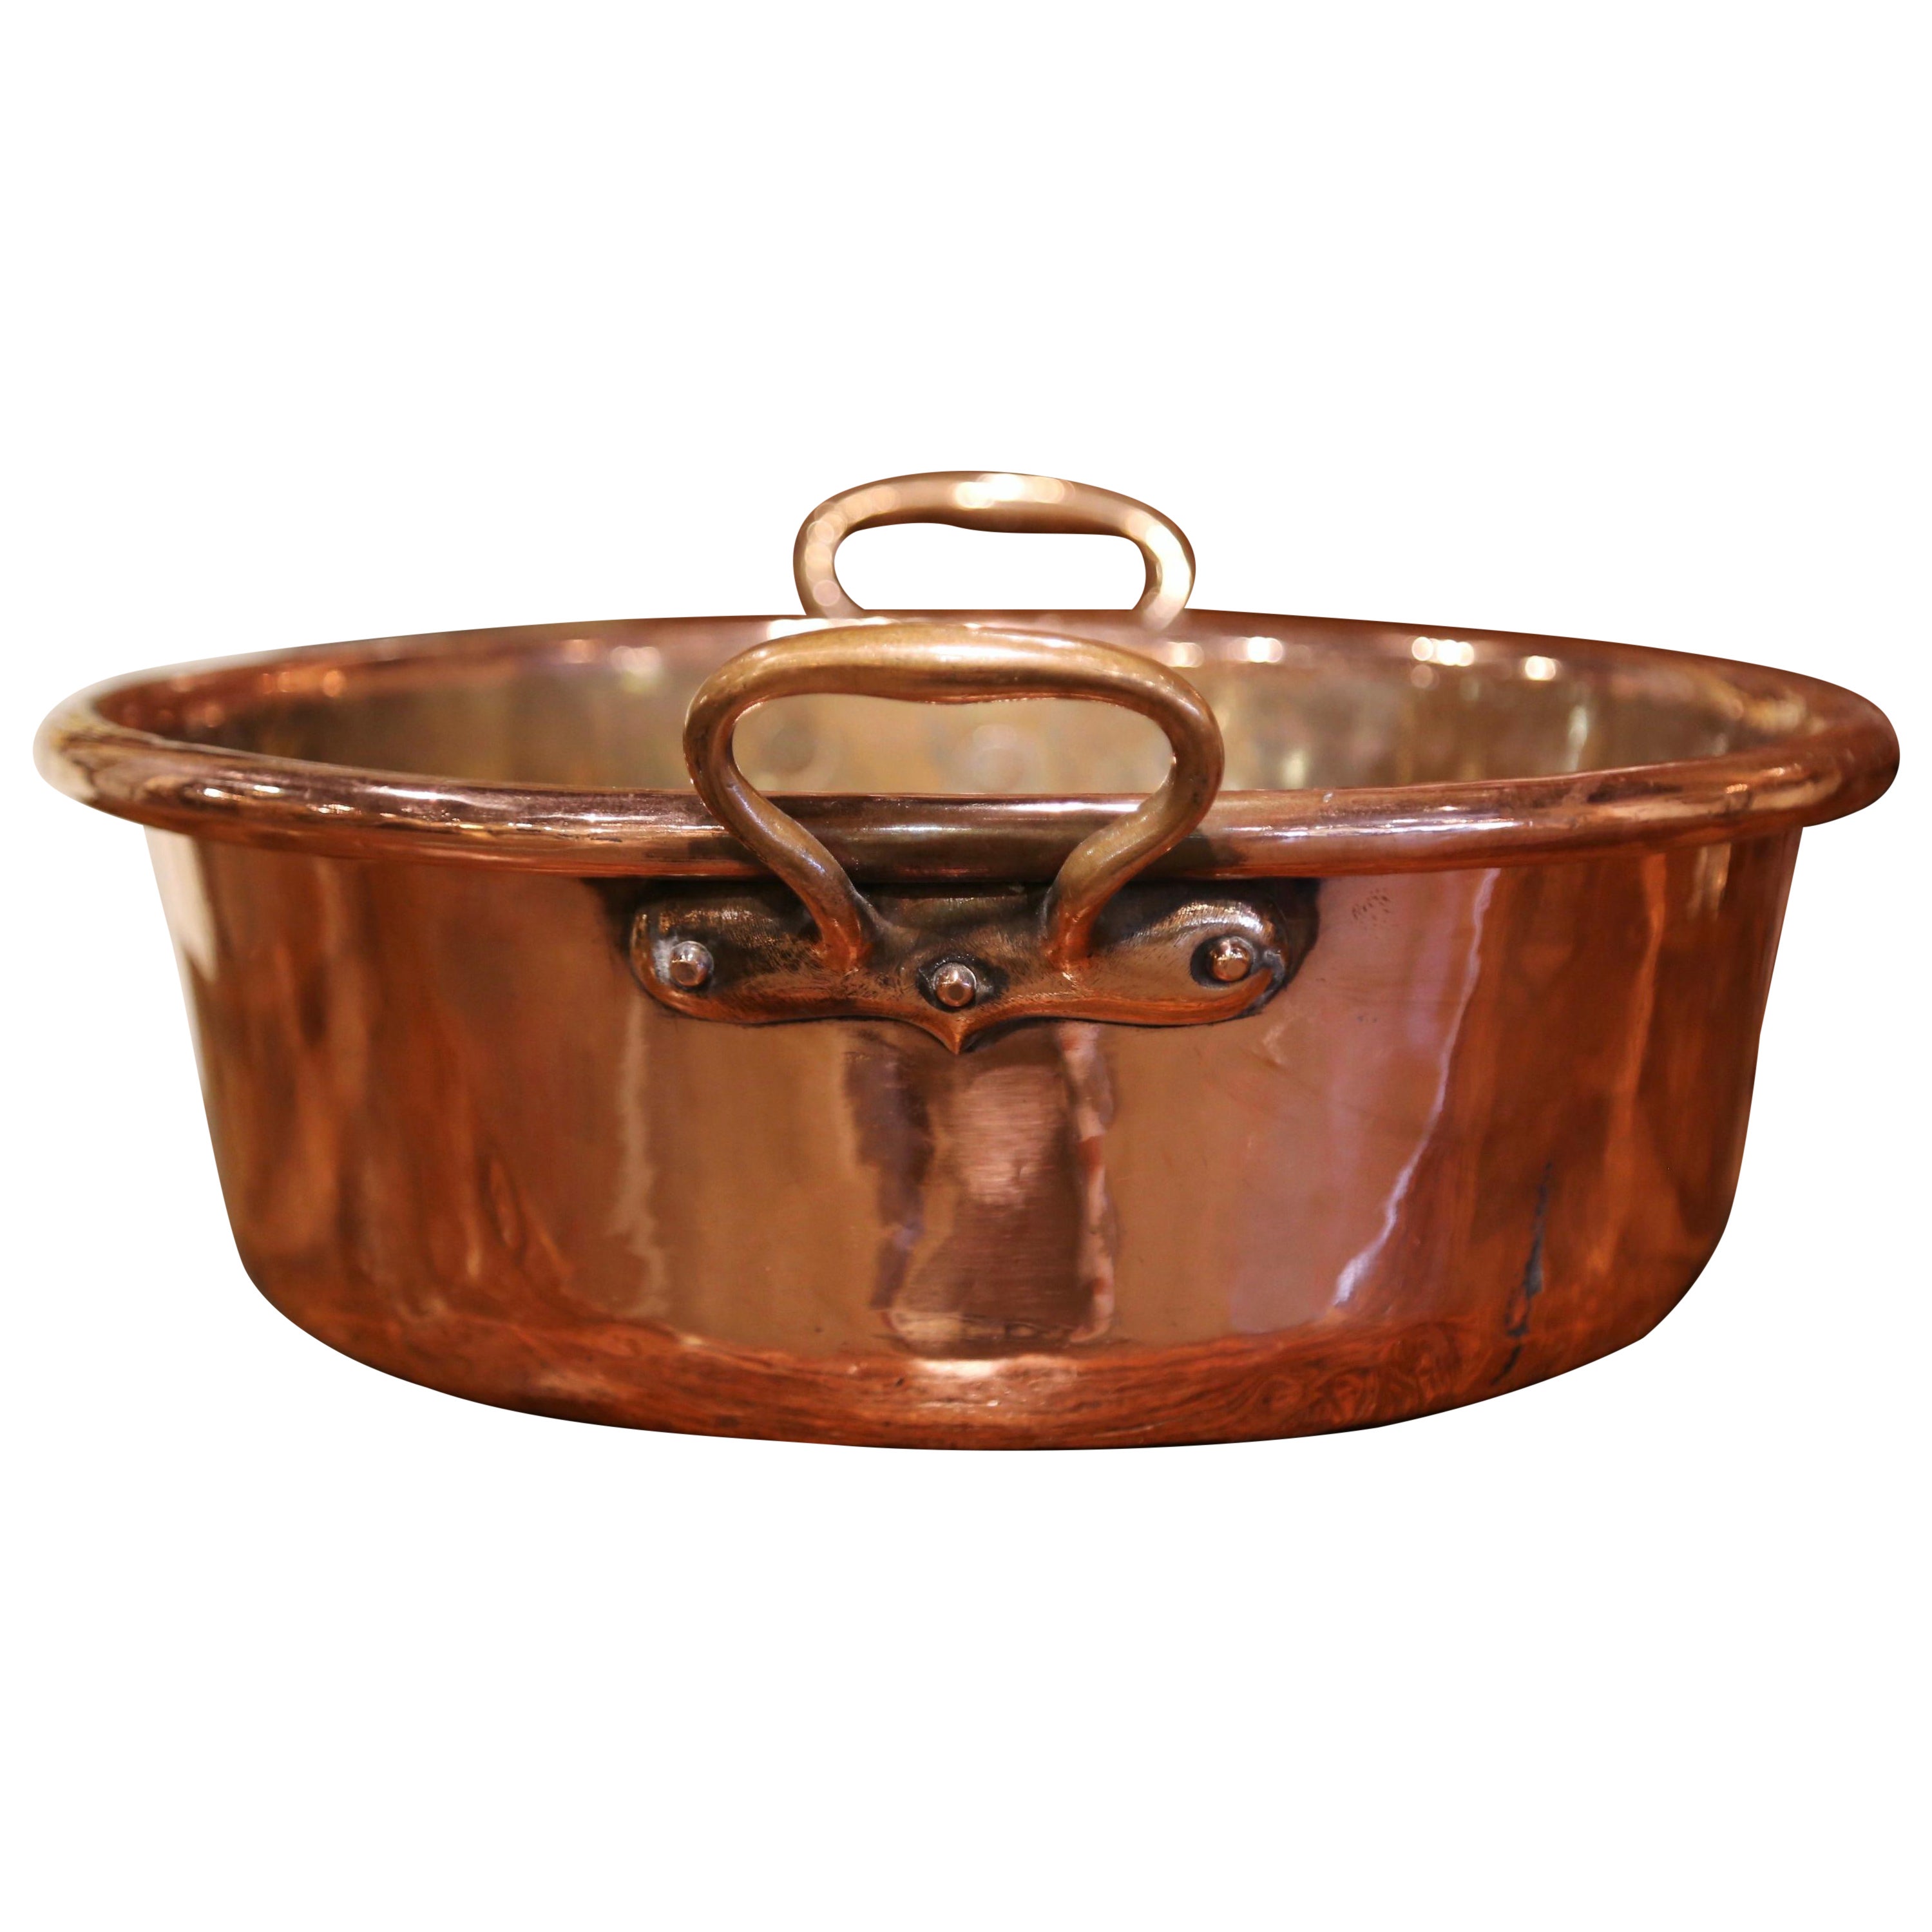 Mid-19th Century French Copper and Brass Jelly Boiling Bowl